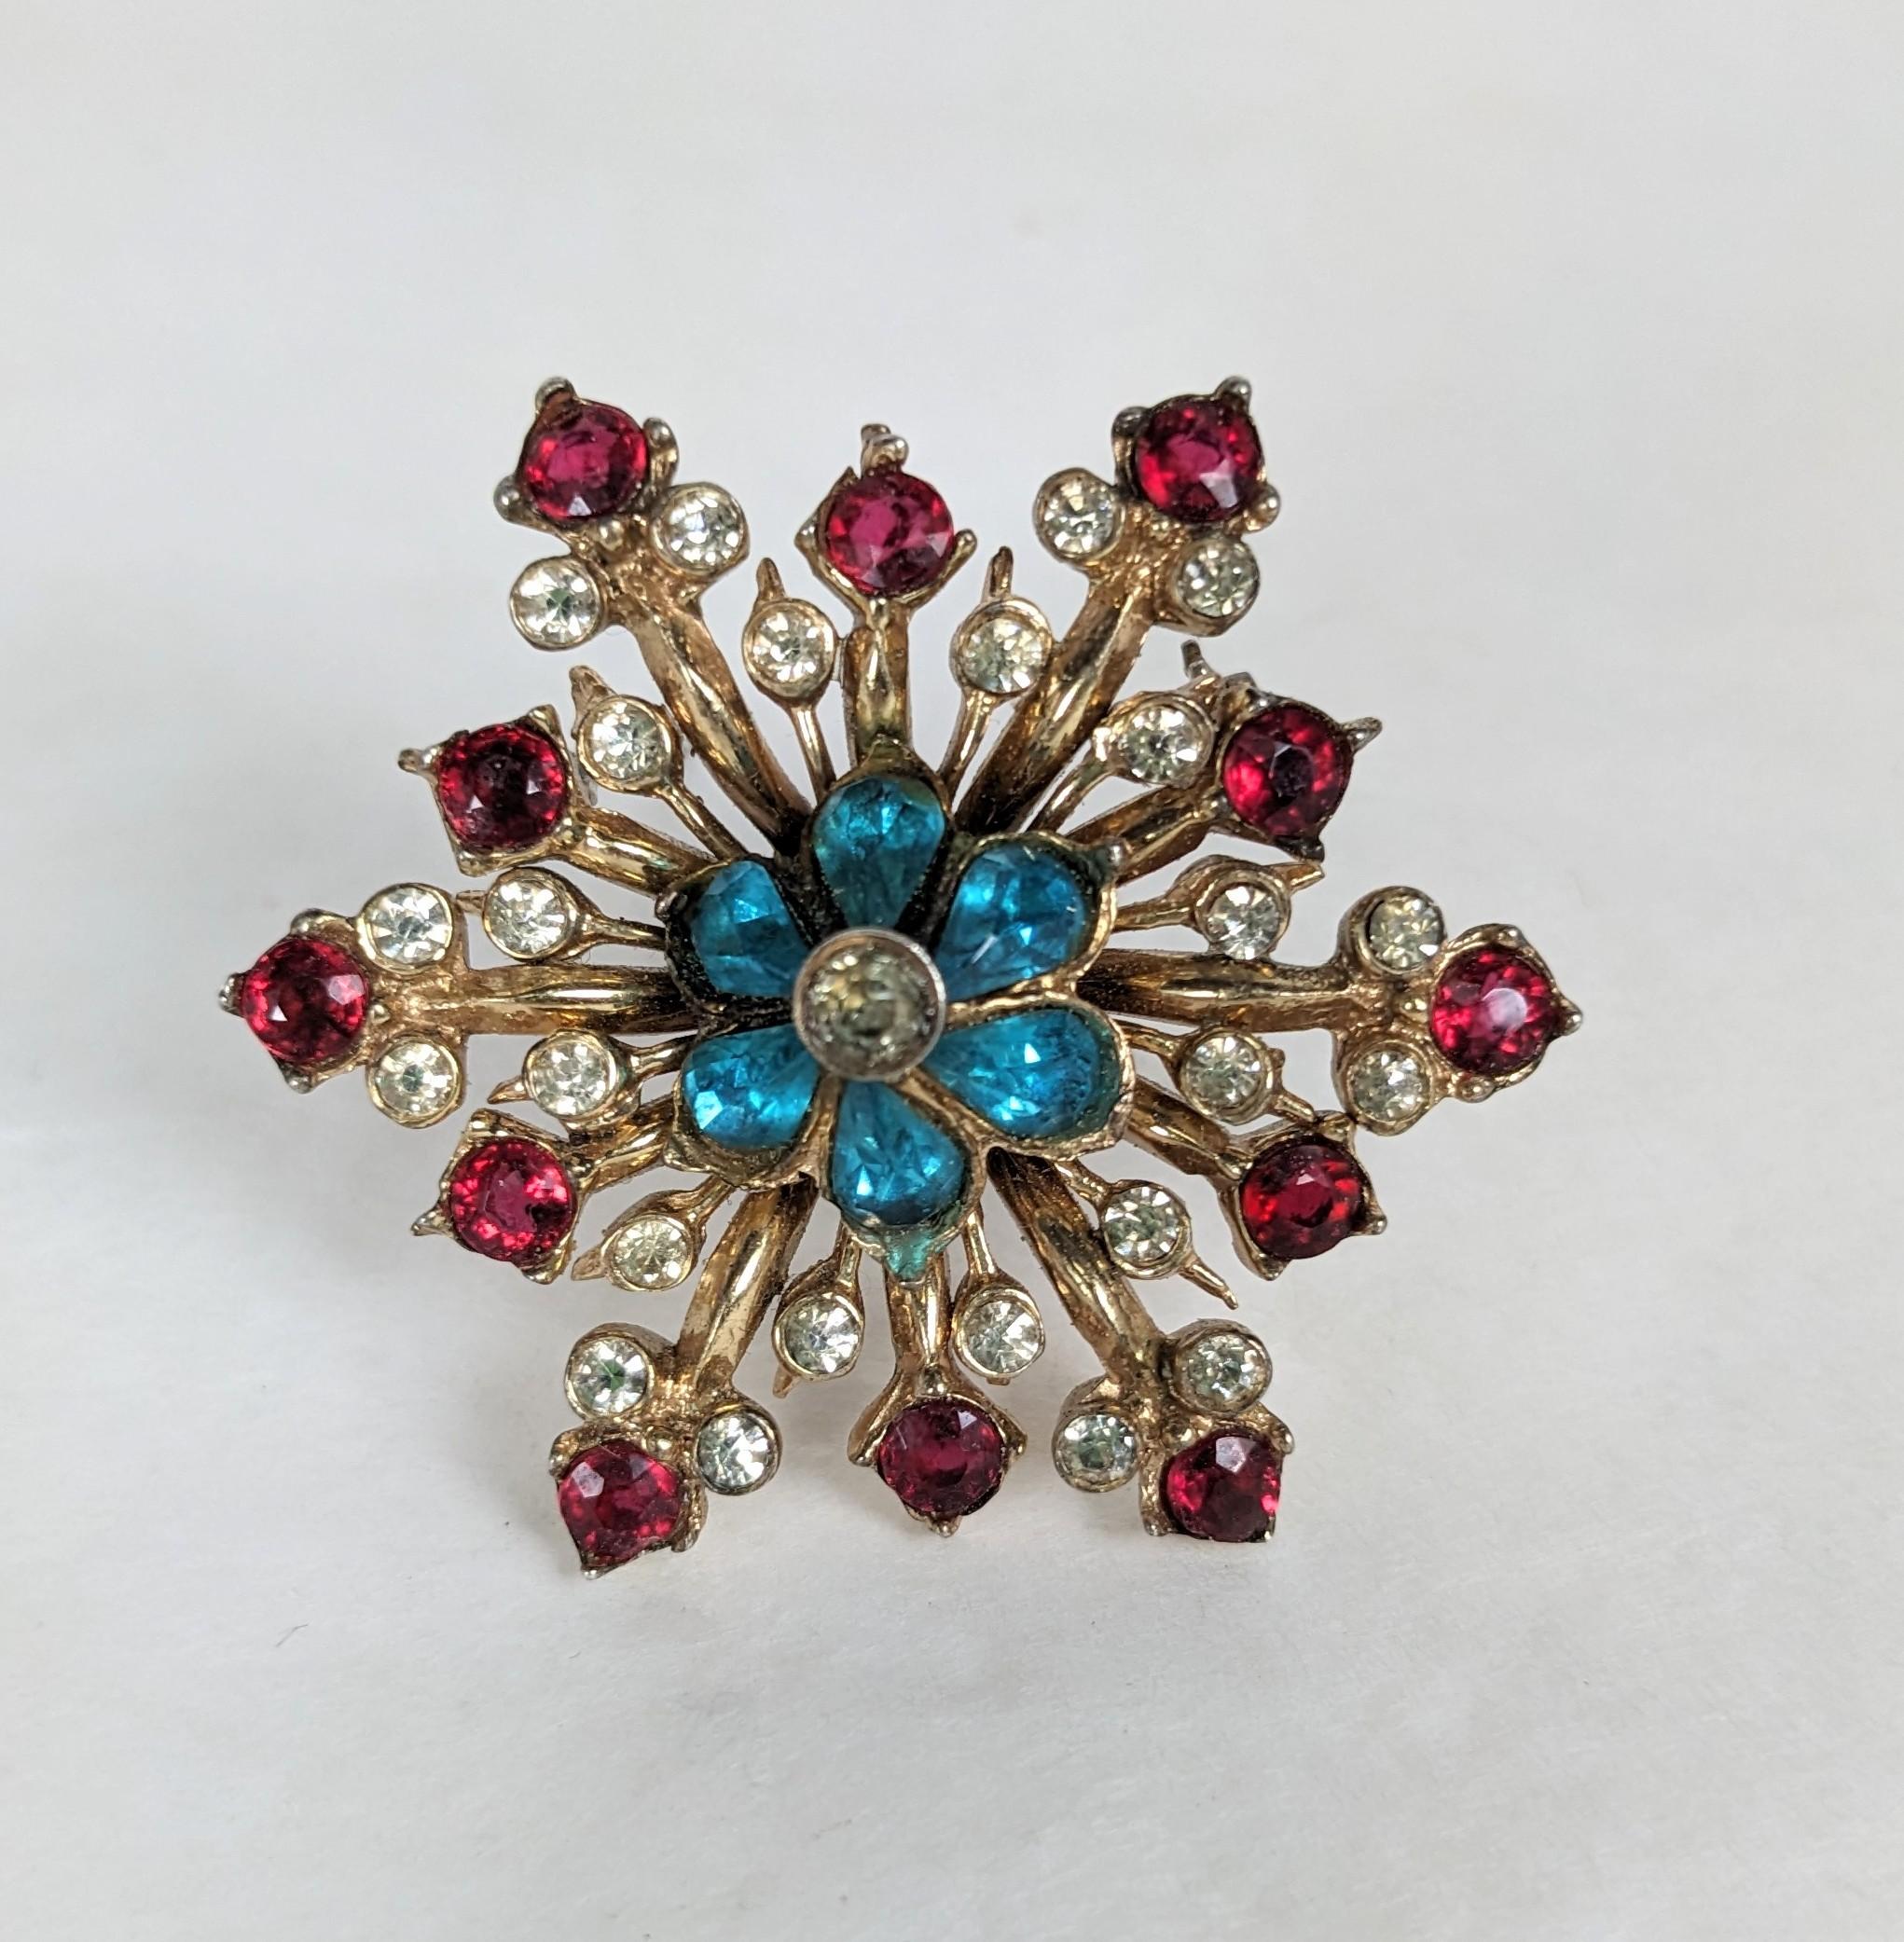 Charming Coro Sterling Retro Star Brooch from the 1940's. Sterling with rose gold vermeil set with aqua, crystal and ruby pastes. 1.5